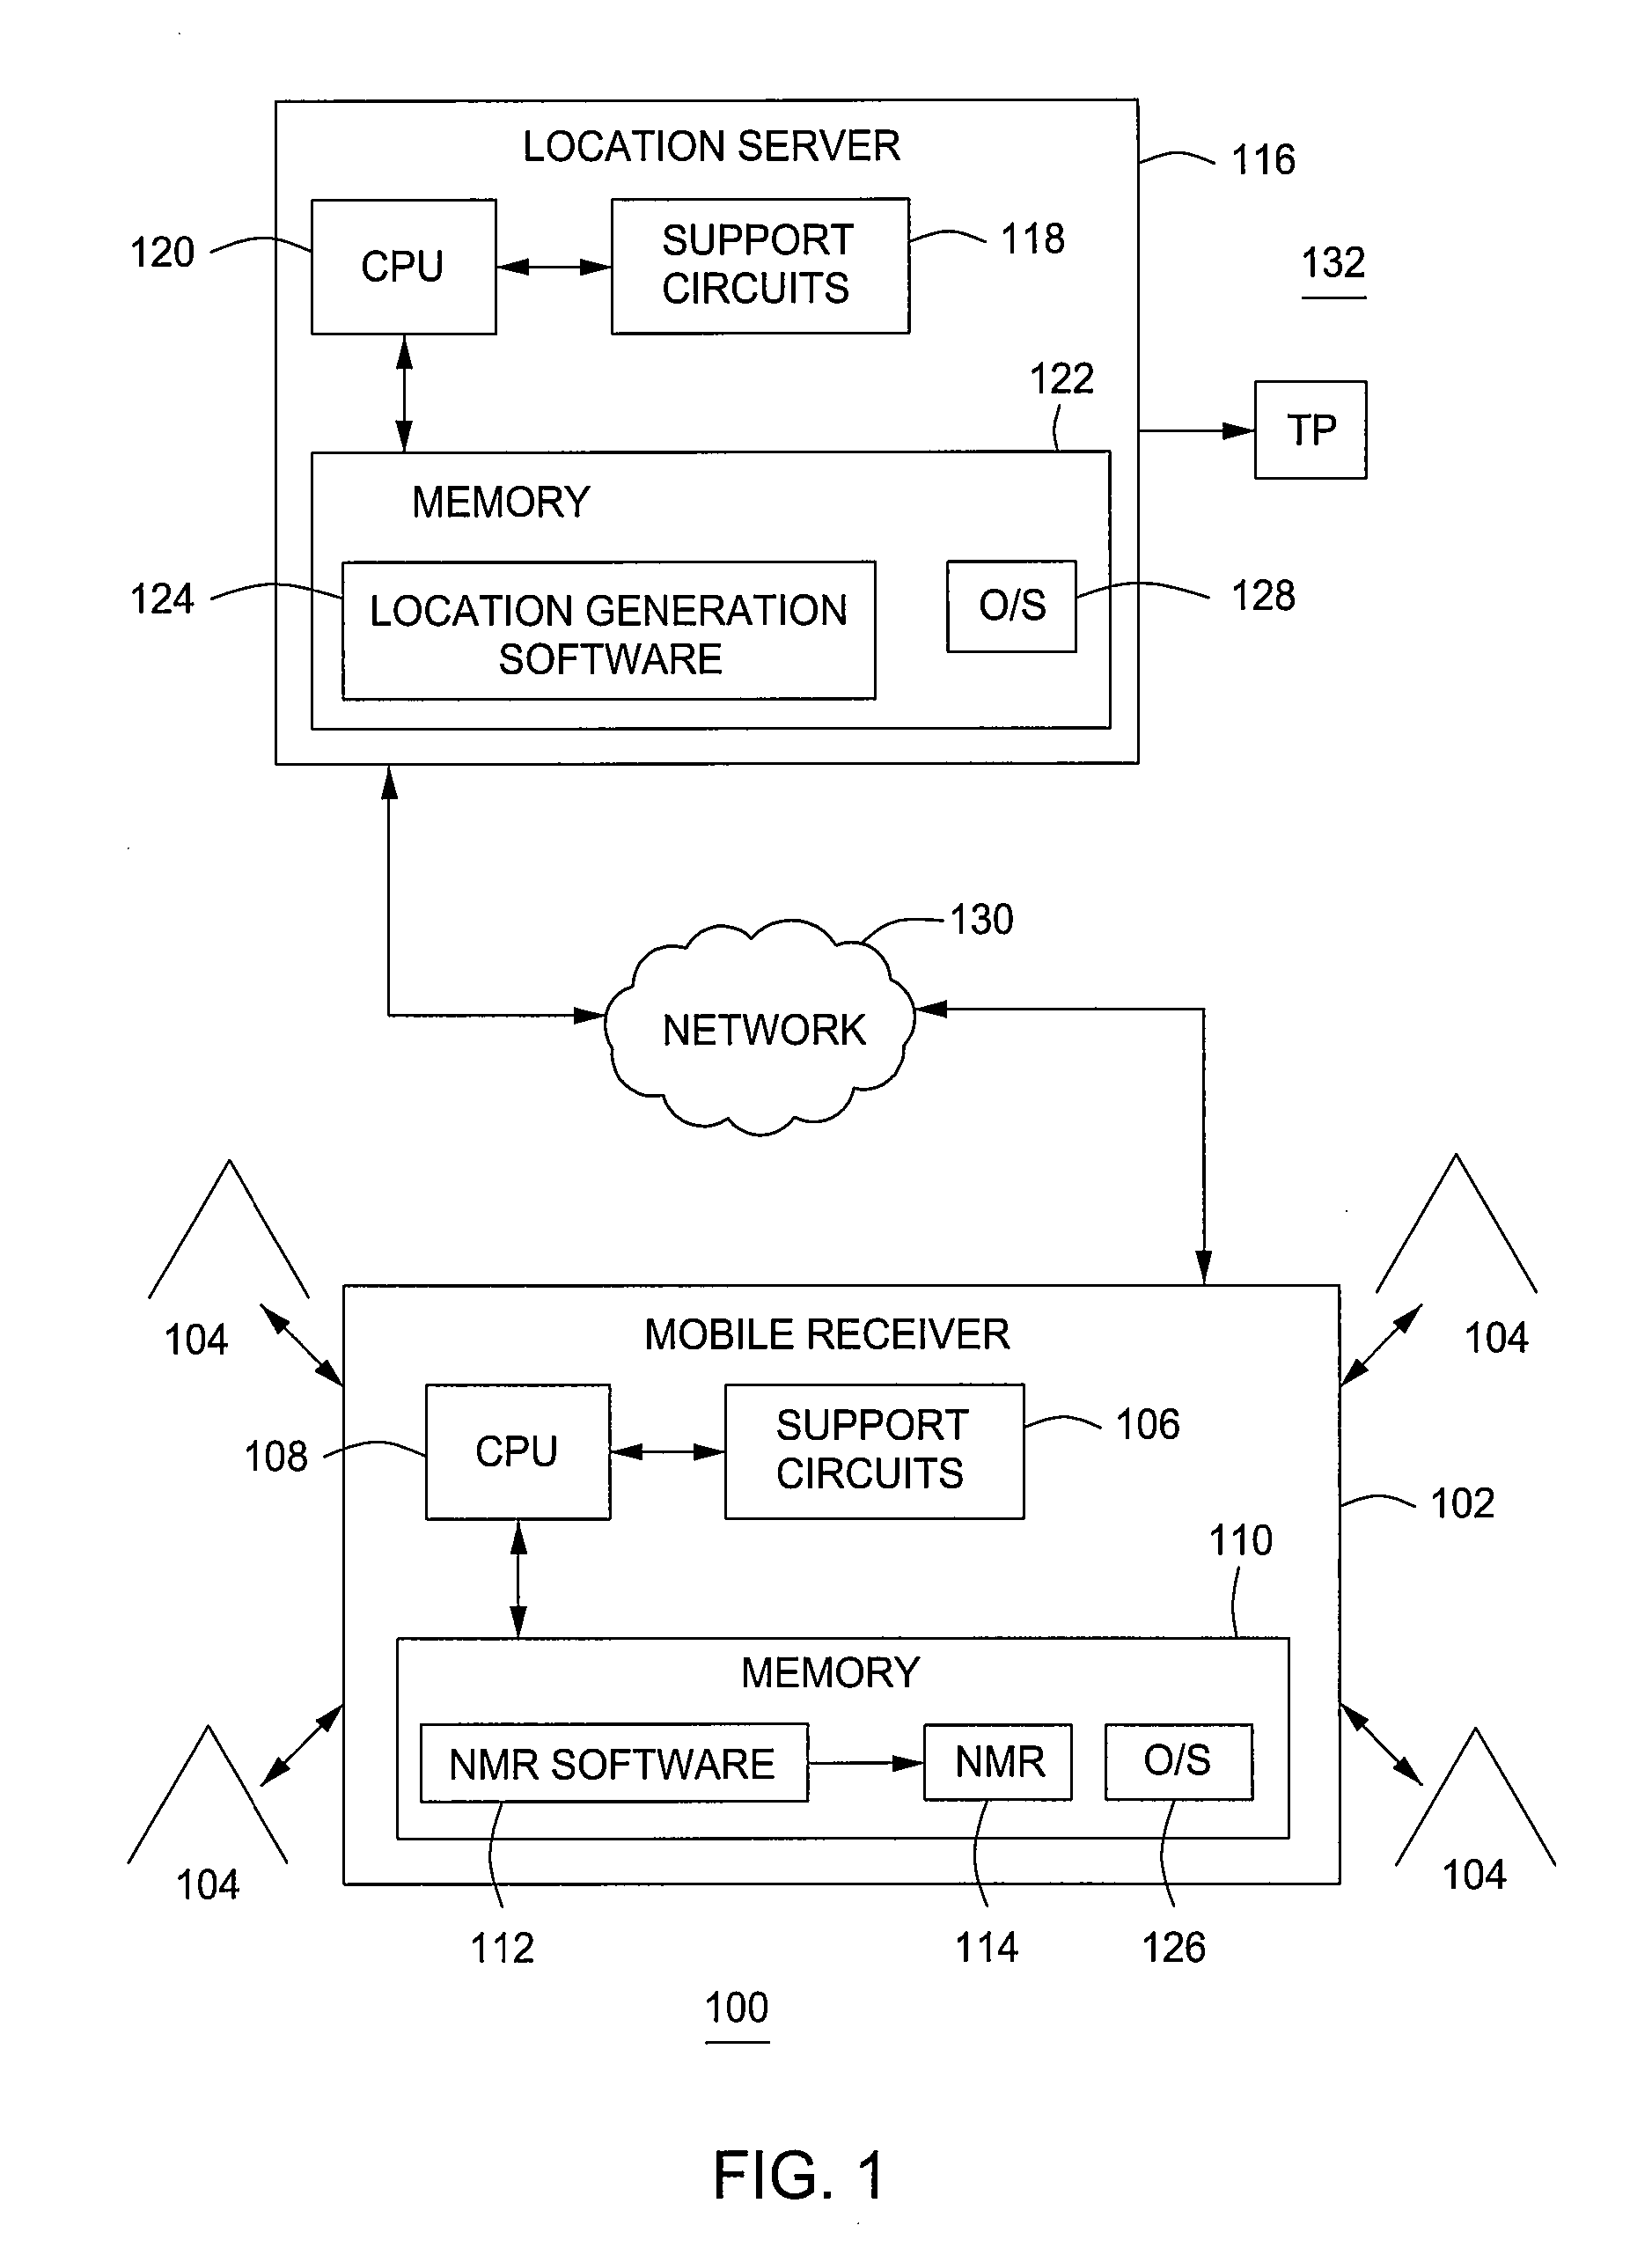 Computing geographical location of a mobile receiver using network measurement reports